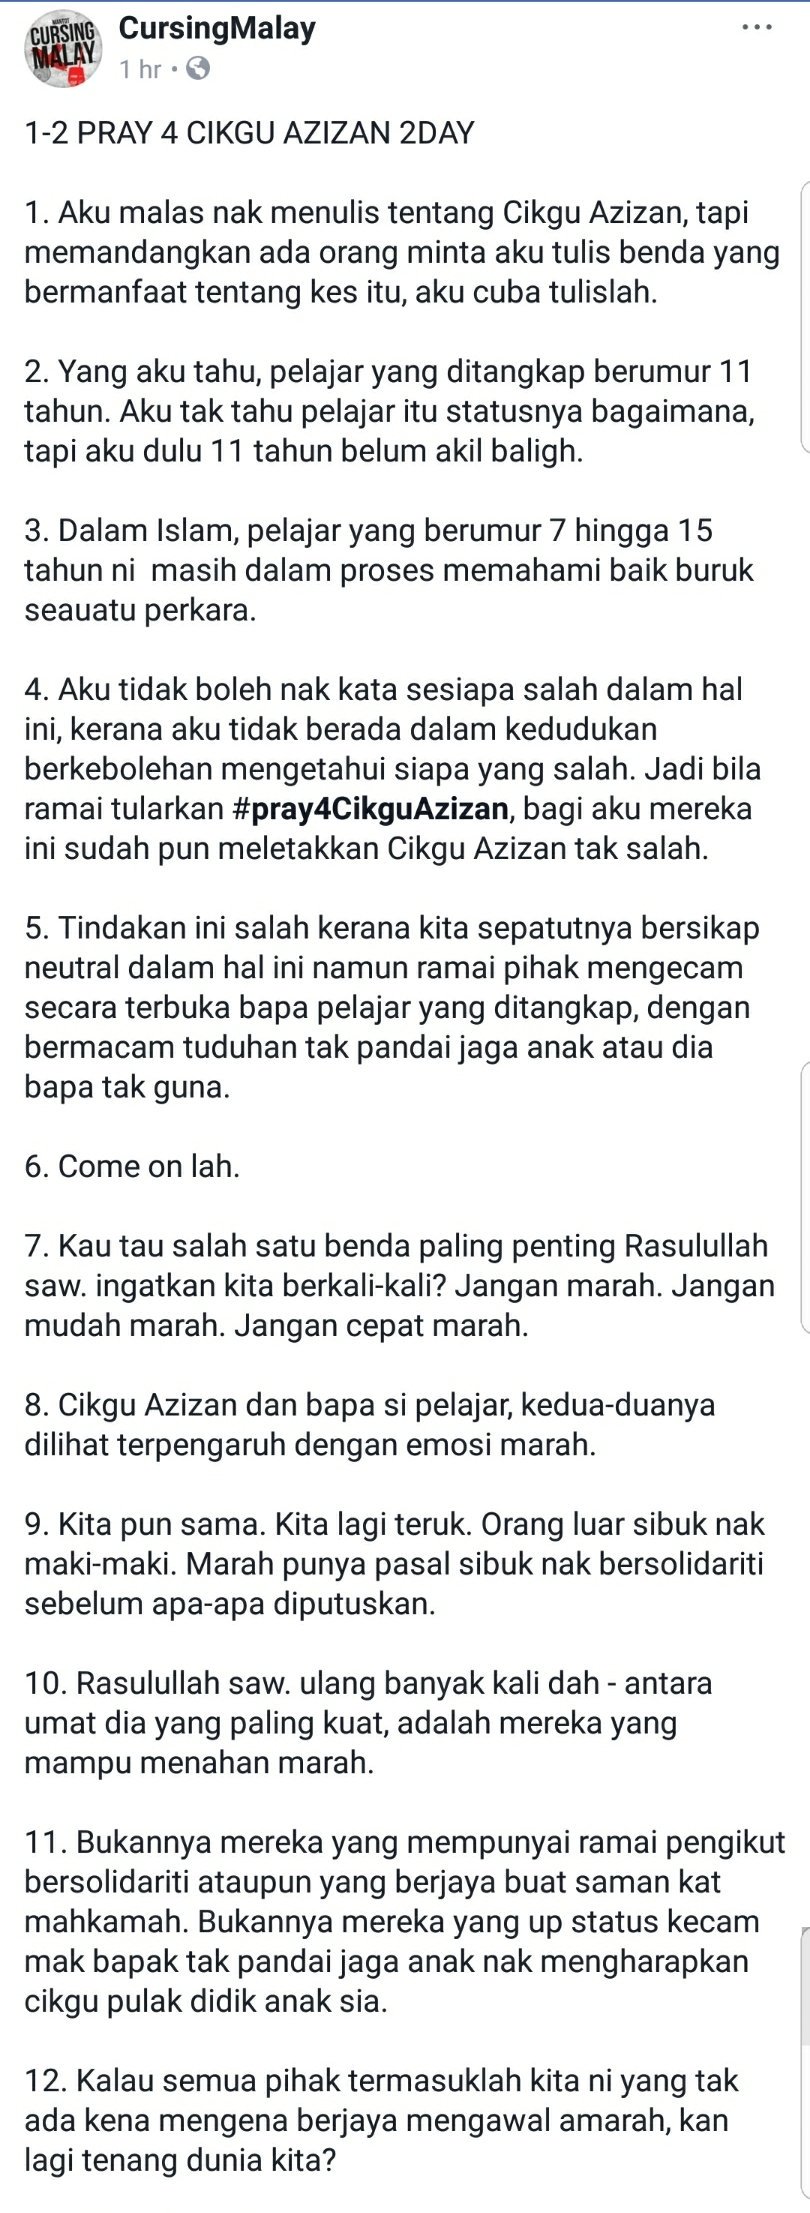 Ar On Twitter Two Of The Most Matured Response That I Found Regarding On Prayforcikguazizan Lesson Never Take A Stand When You Don T Know The Whole Story That Why I Rather